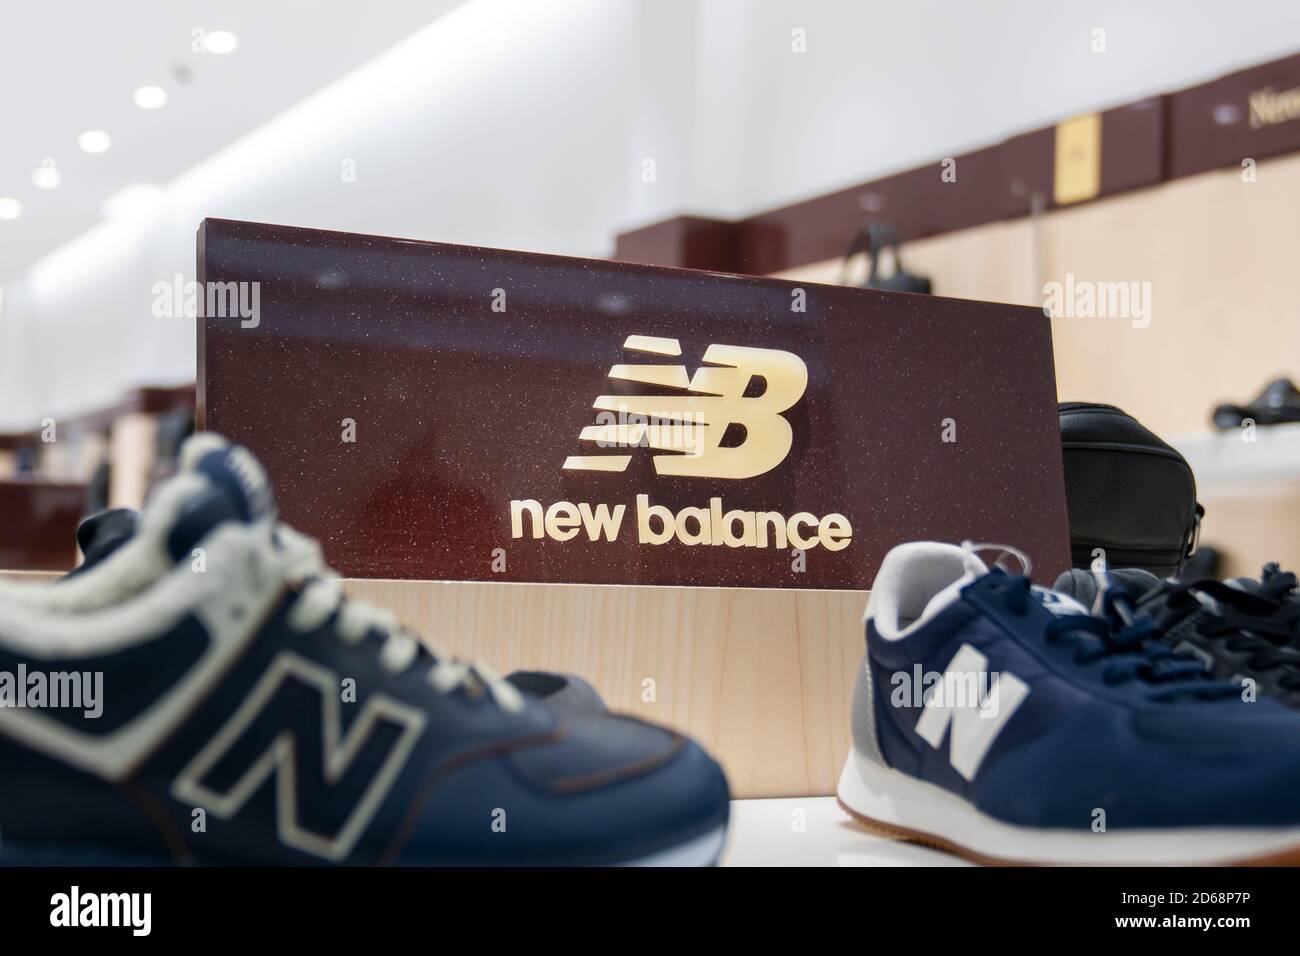 Krasnoyarsk, Russia, October 15, 2020: New Balance sneakers and the footwear company logo. showcase and counter in the store, shopping specialty store Stock Photo